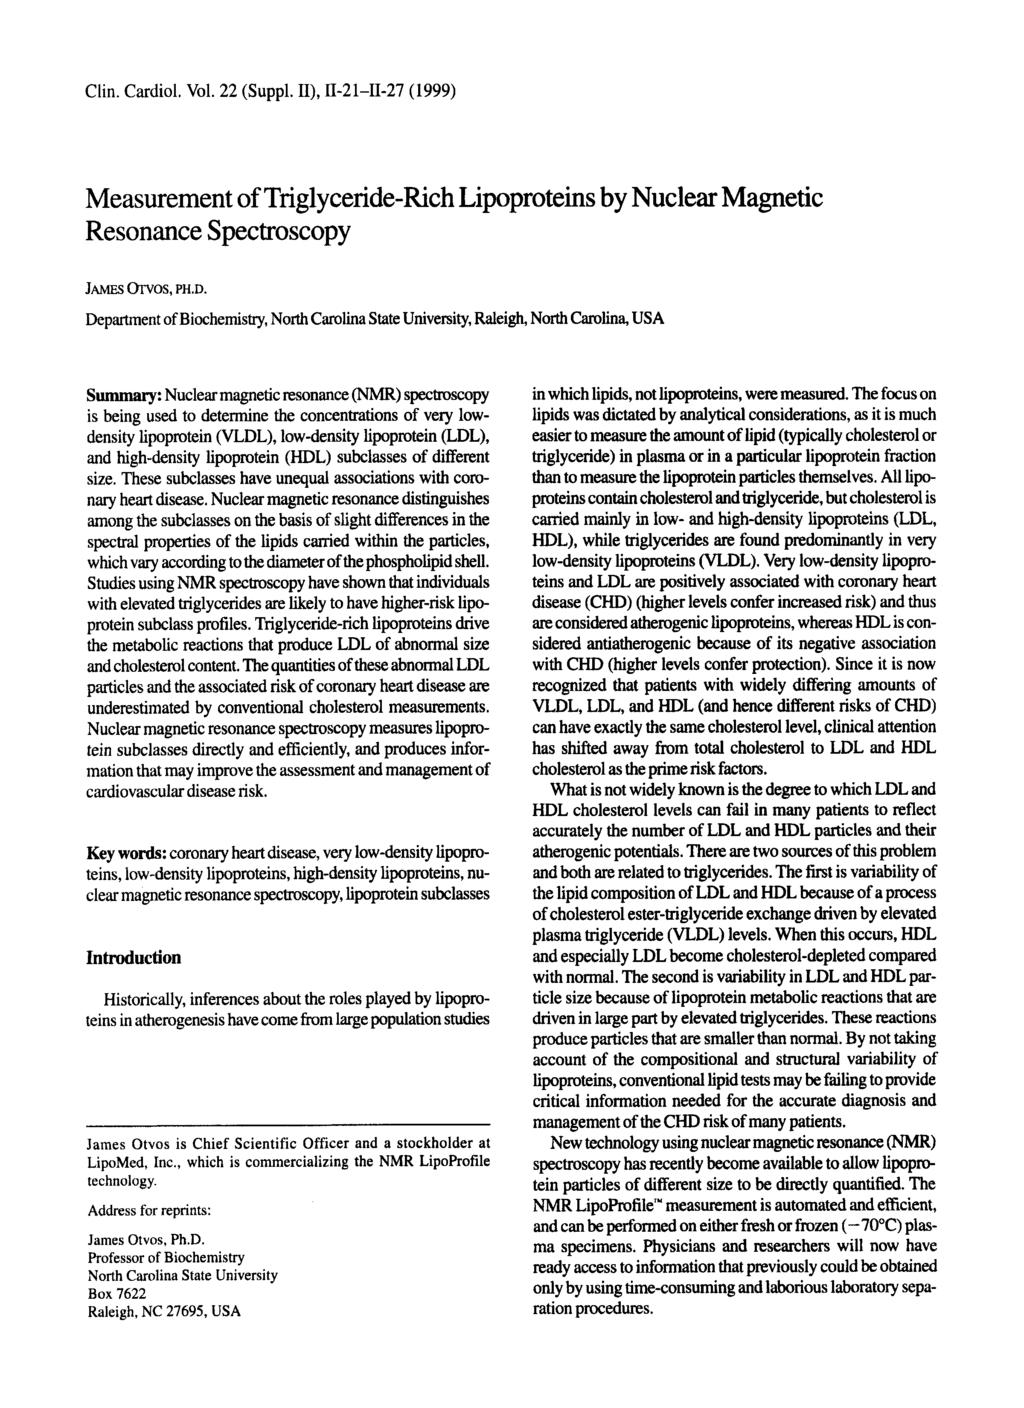 Clin. Cardiol. Vol. 22 (Suppl. 11), 11-21-11-27 (1999) Measurement of Trigly ceride-rich Lipoproteins by Nuclear Magnetic Resonance Spectroscopy JAMES CII'VOS, PH.D.